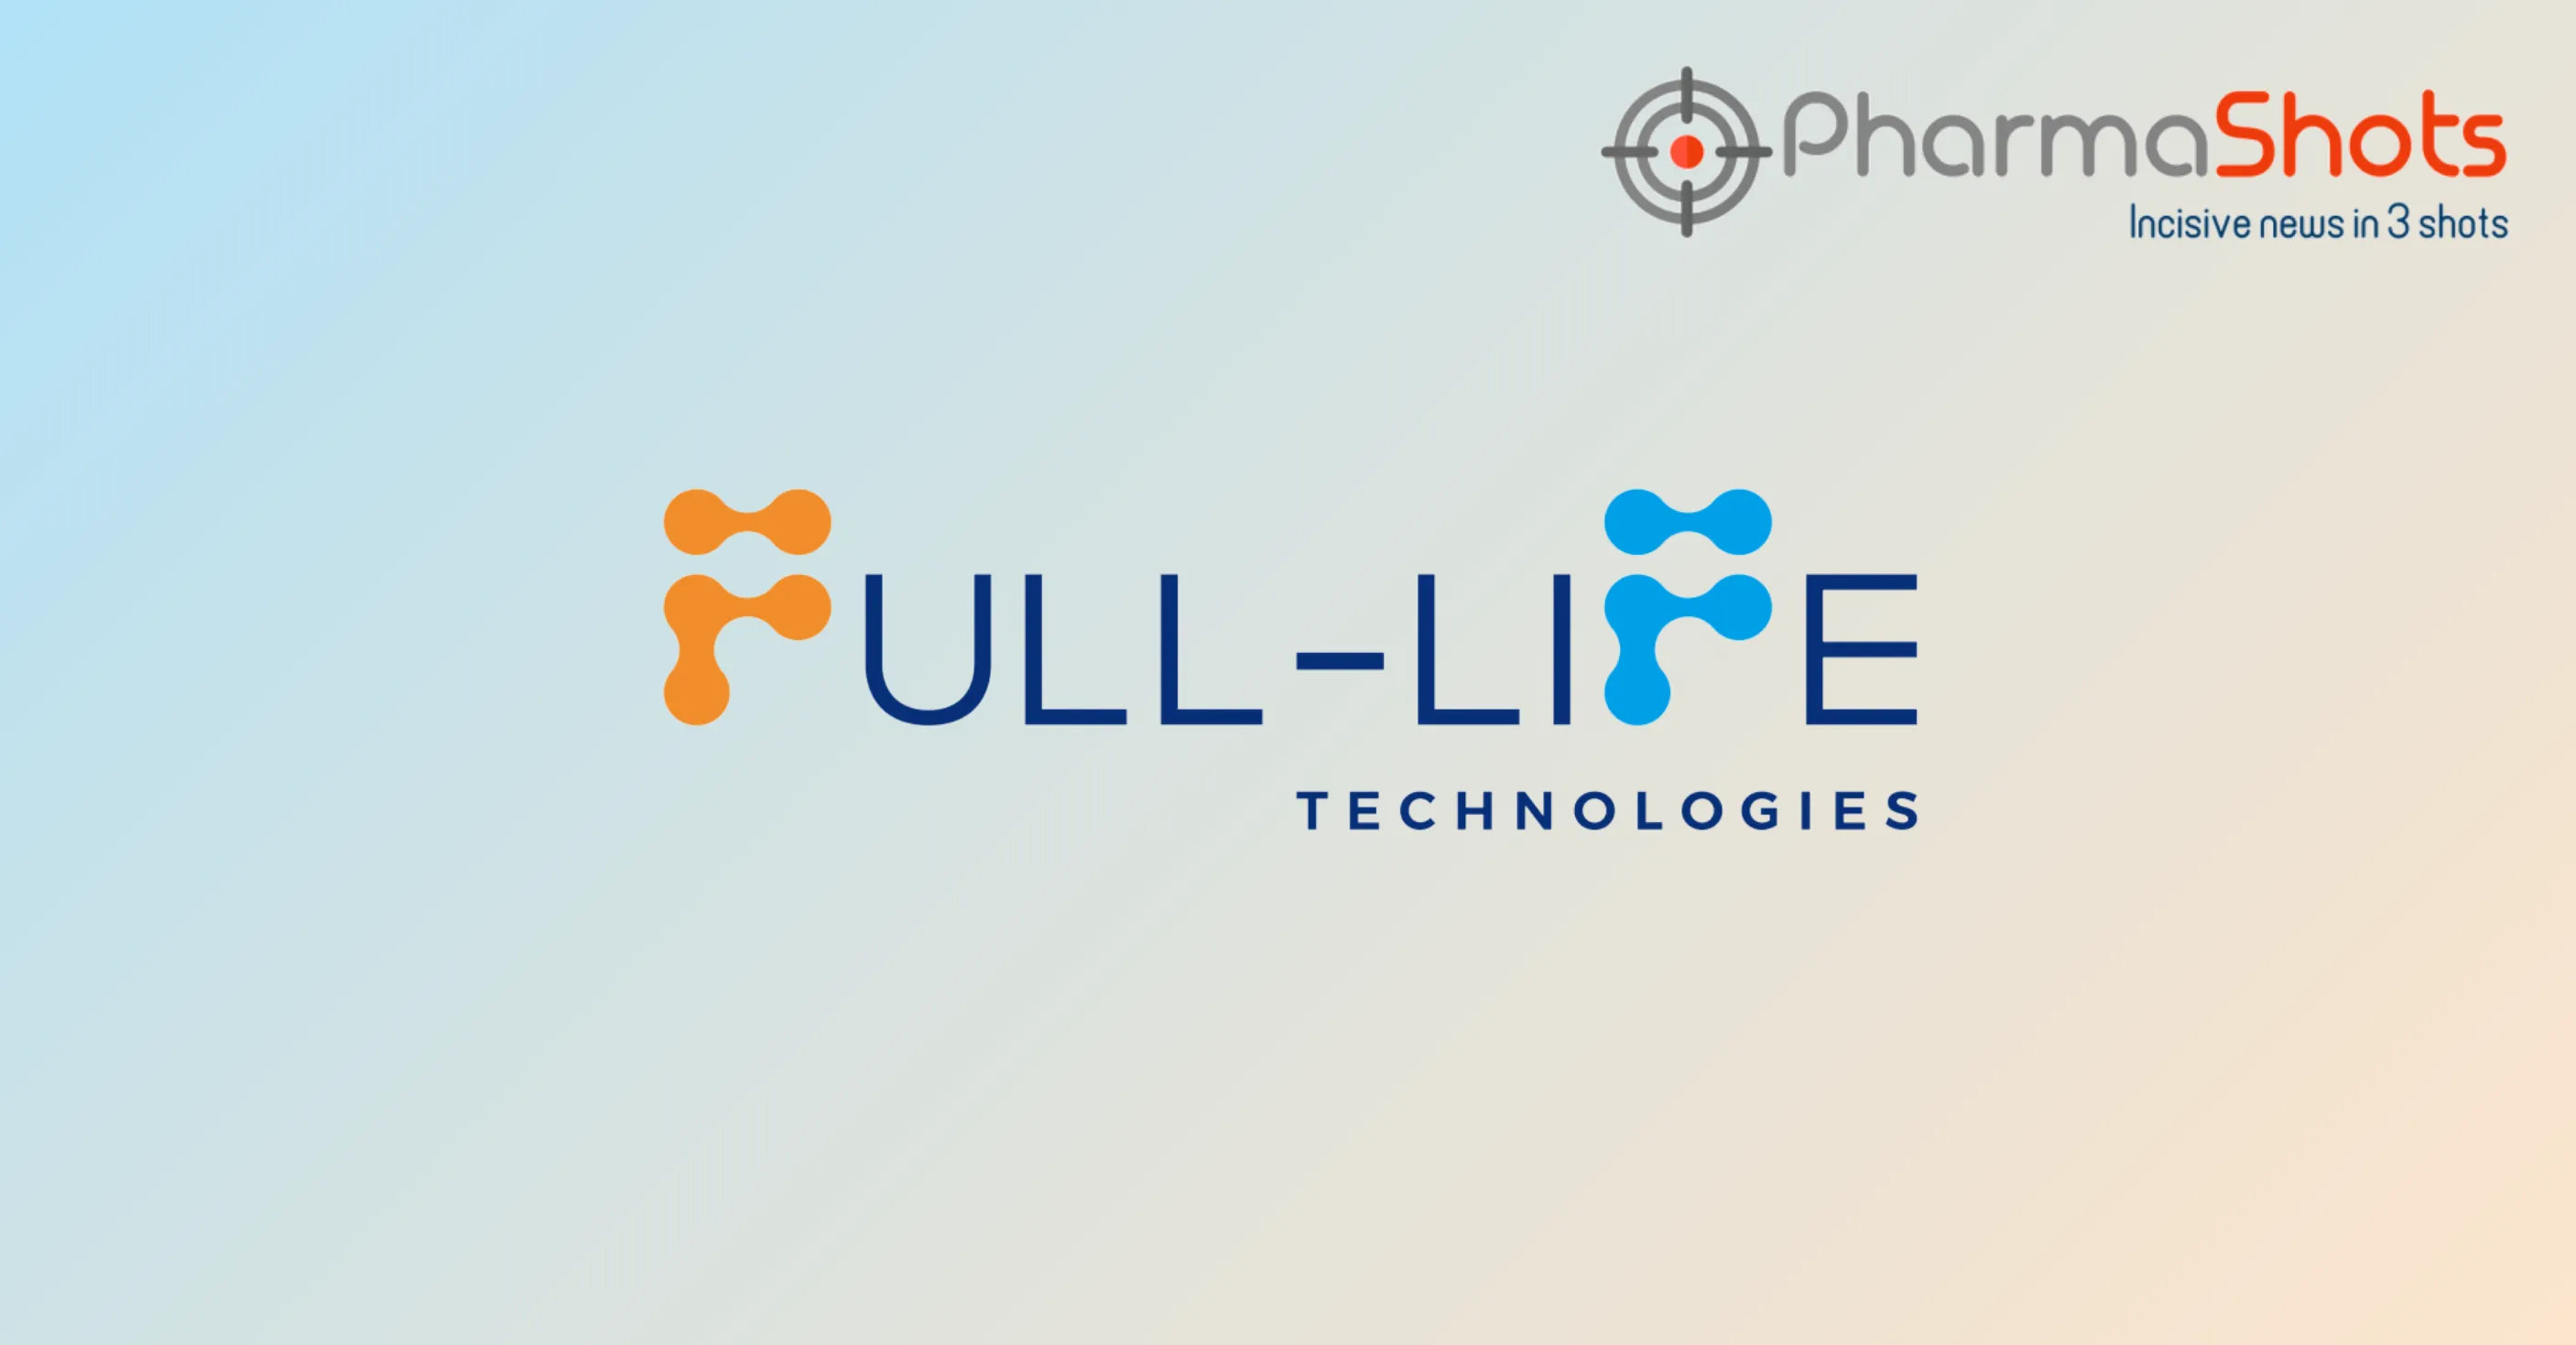 Full-Life Technologies’ 225Ac-FL-020 Gains the US FDA’s Fast Track Designation to Treat Metastatic Castration-Resistant Prostate Cancer